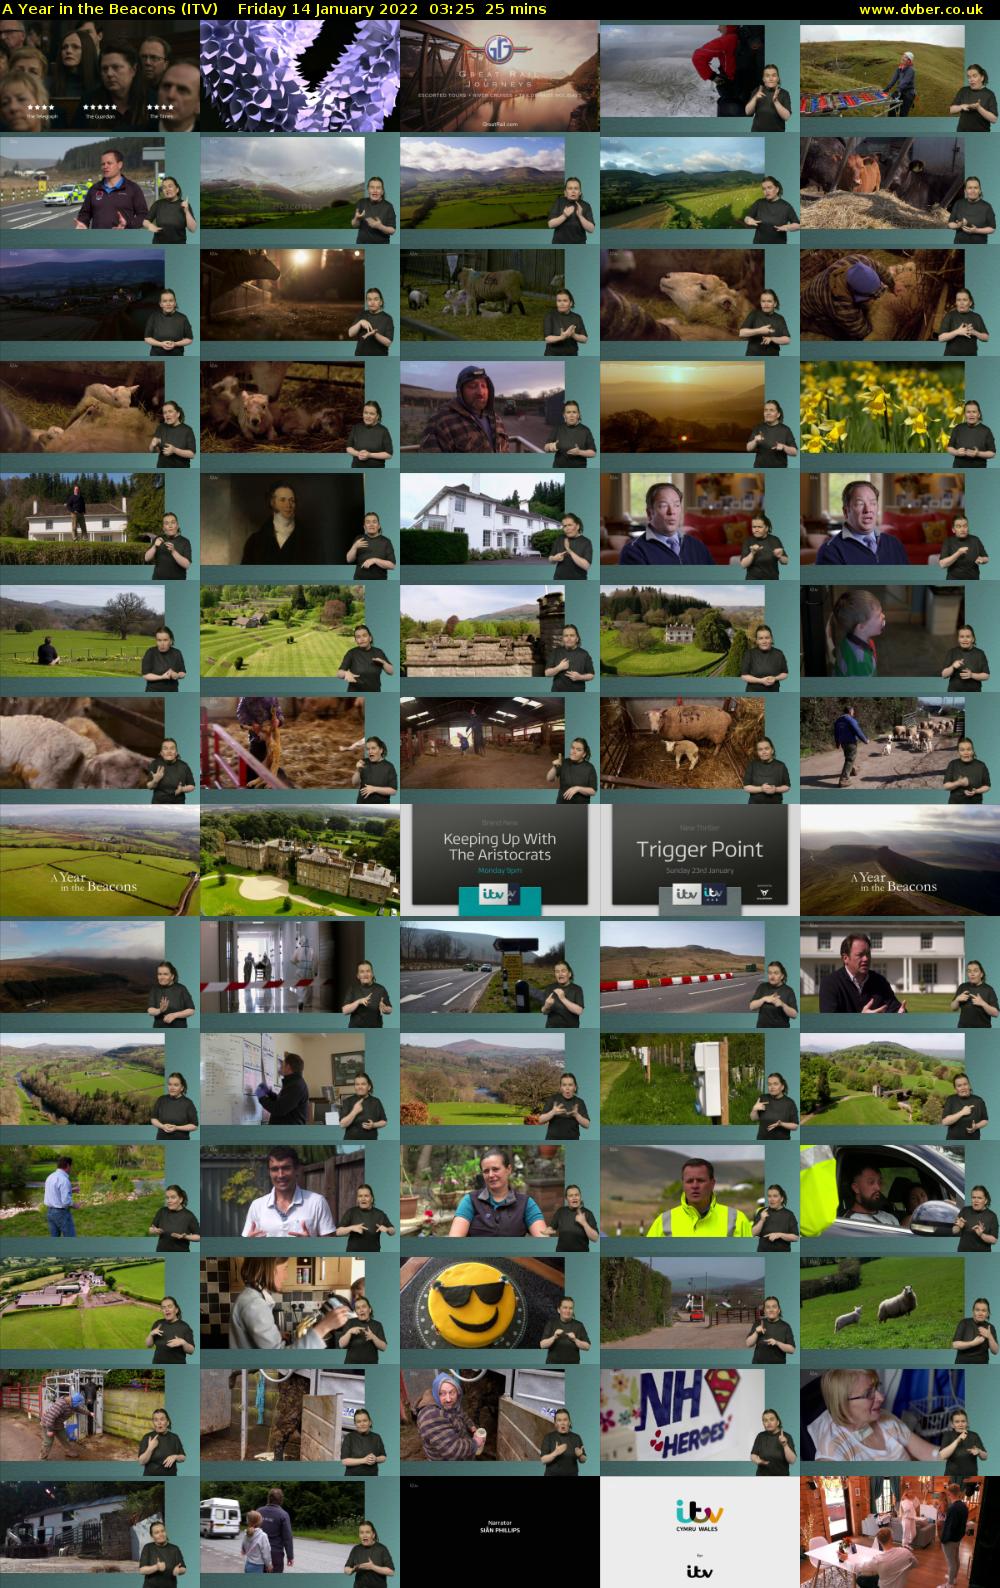 A Year in the Beacons (ITV) Friday 14 January 2022 03:25 - 03:50